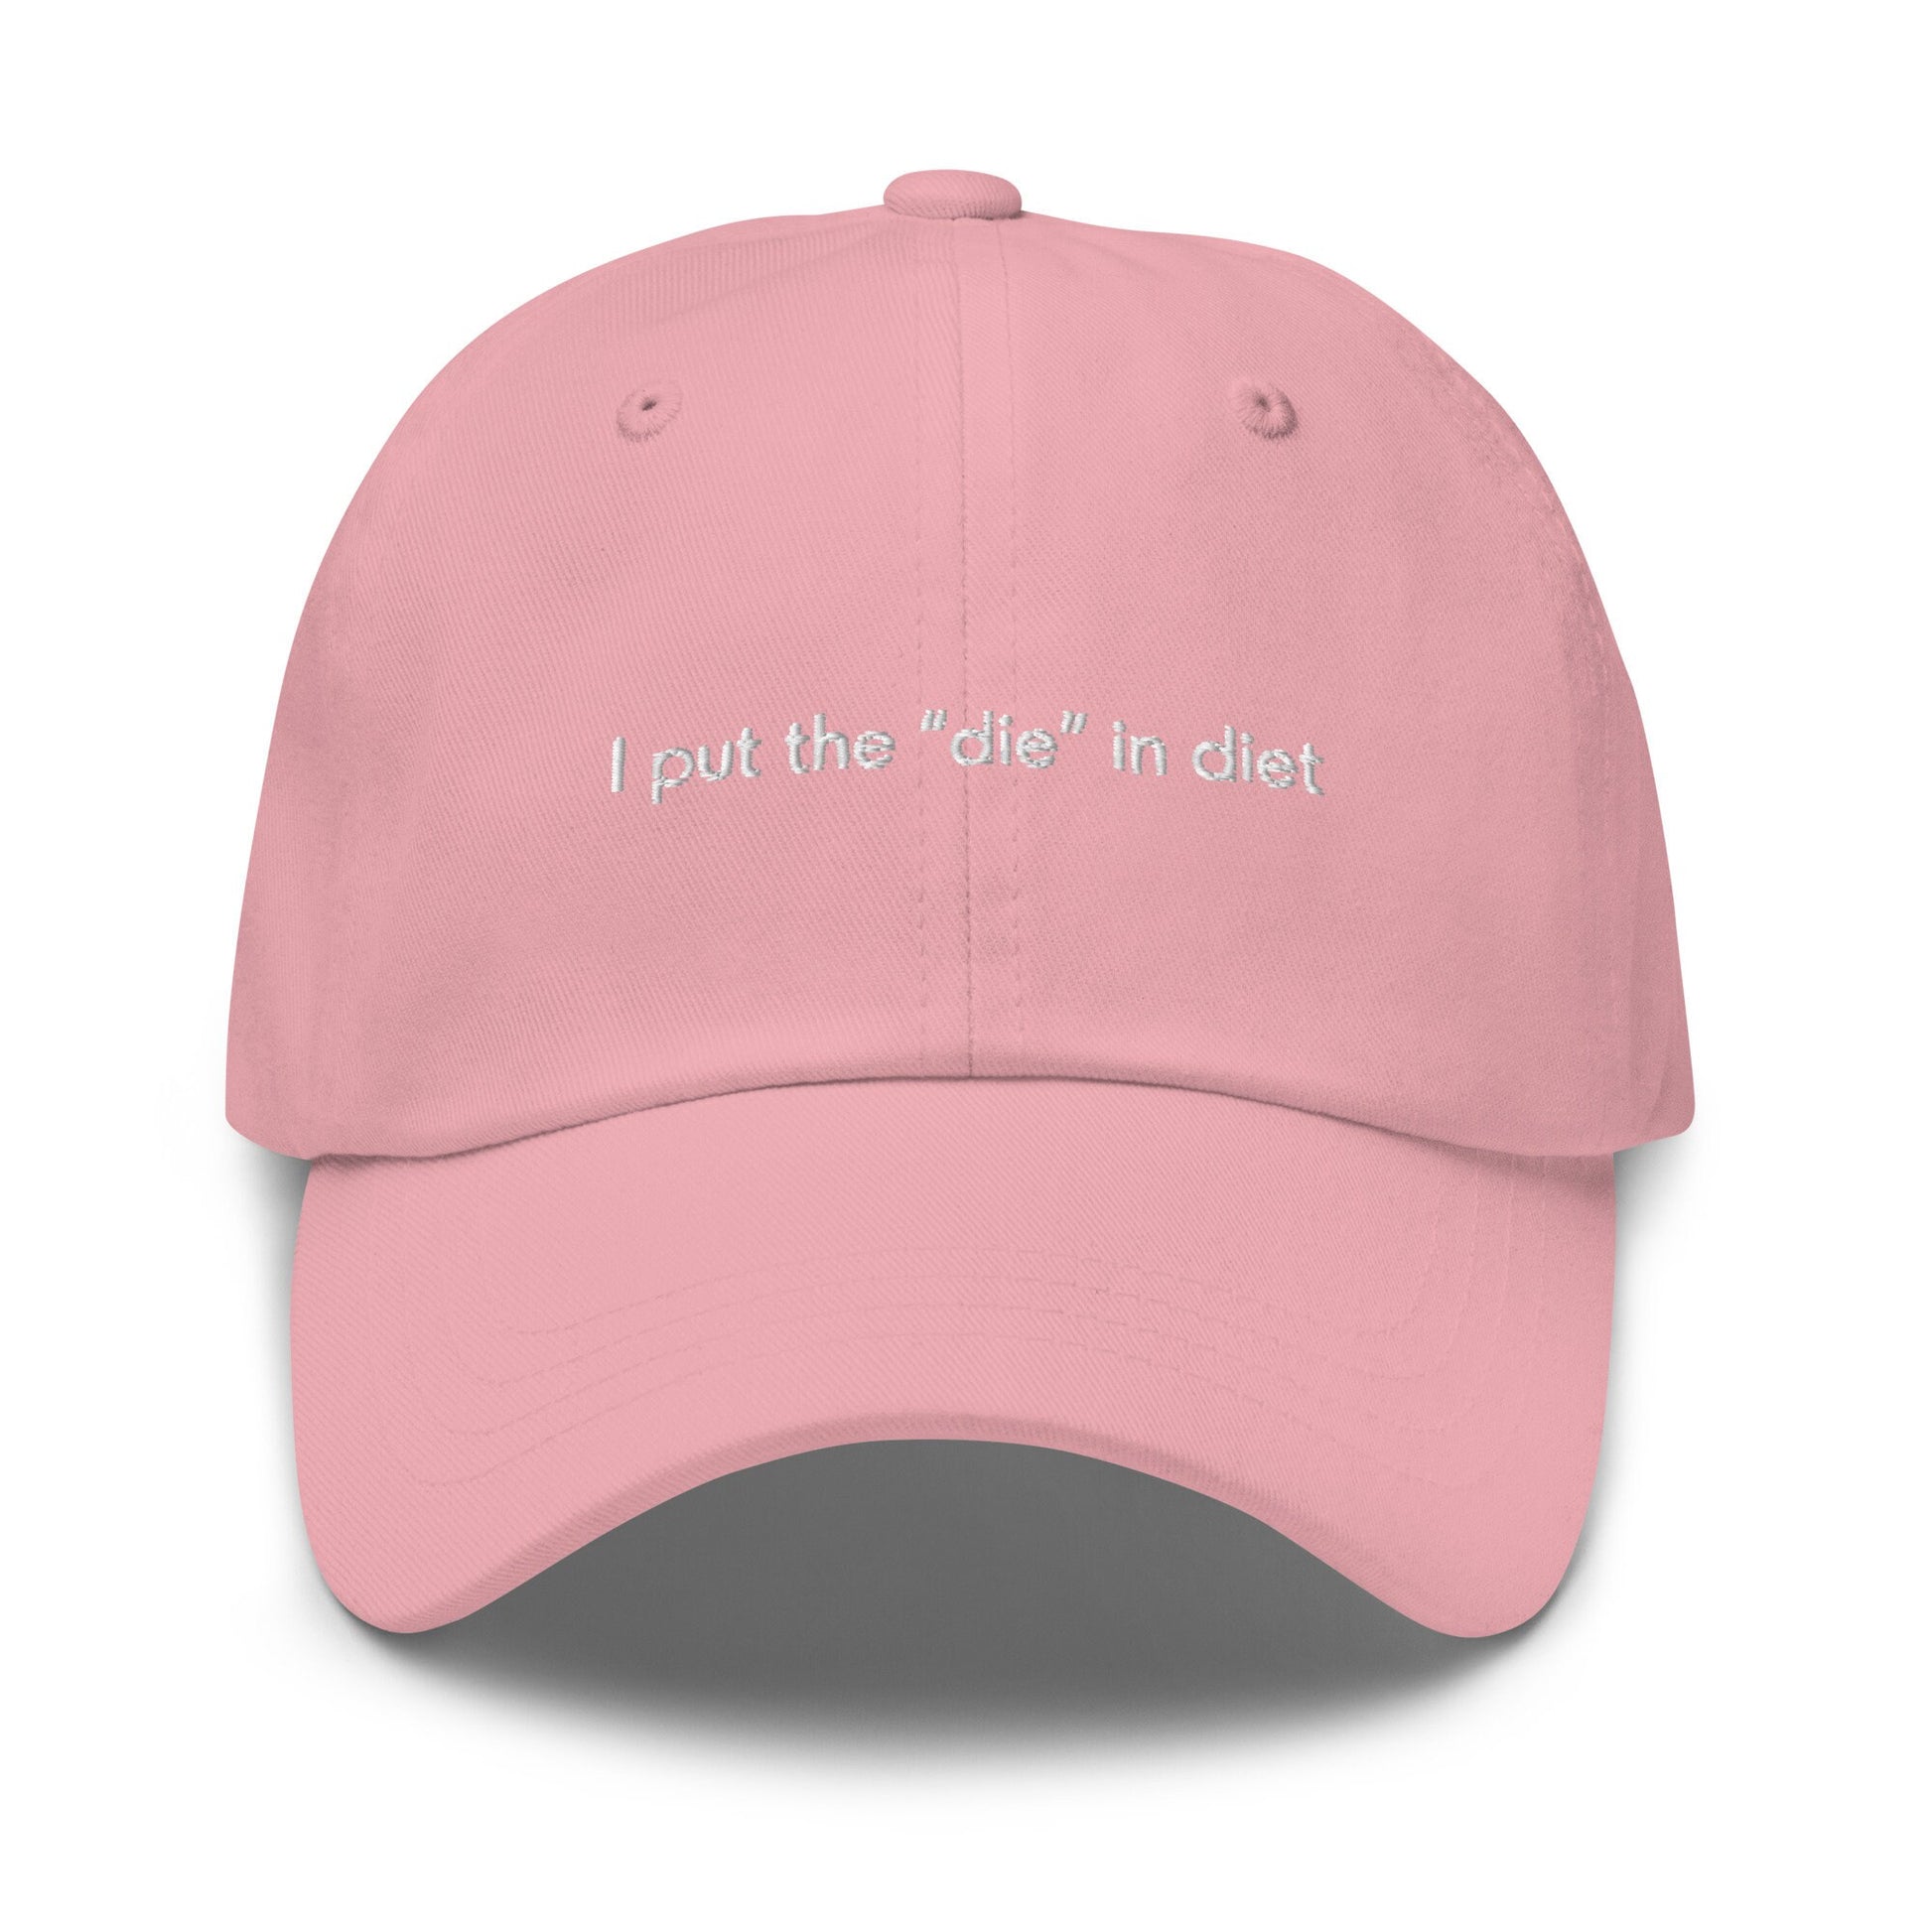 Diet Hat - I put the die in diet - Funny Bestie Gift - Cotton Embroidered Dad Hat - Multiple Colors